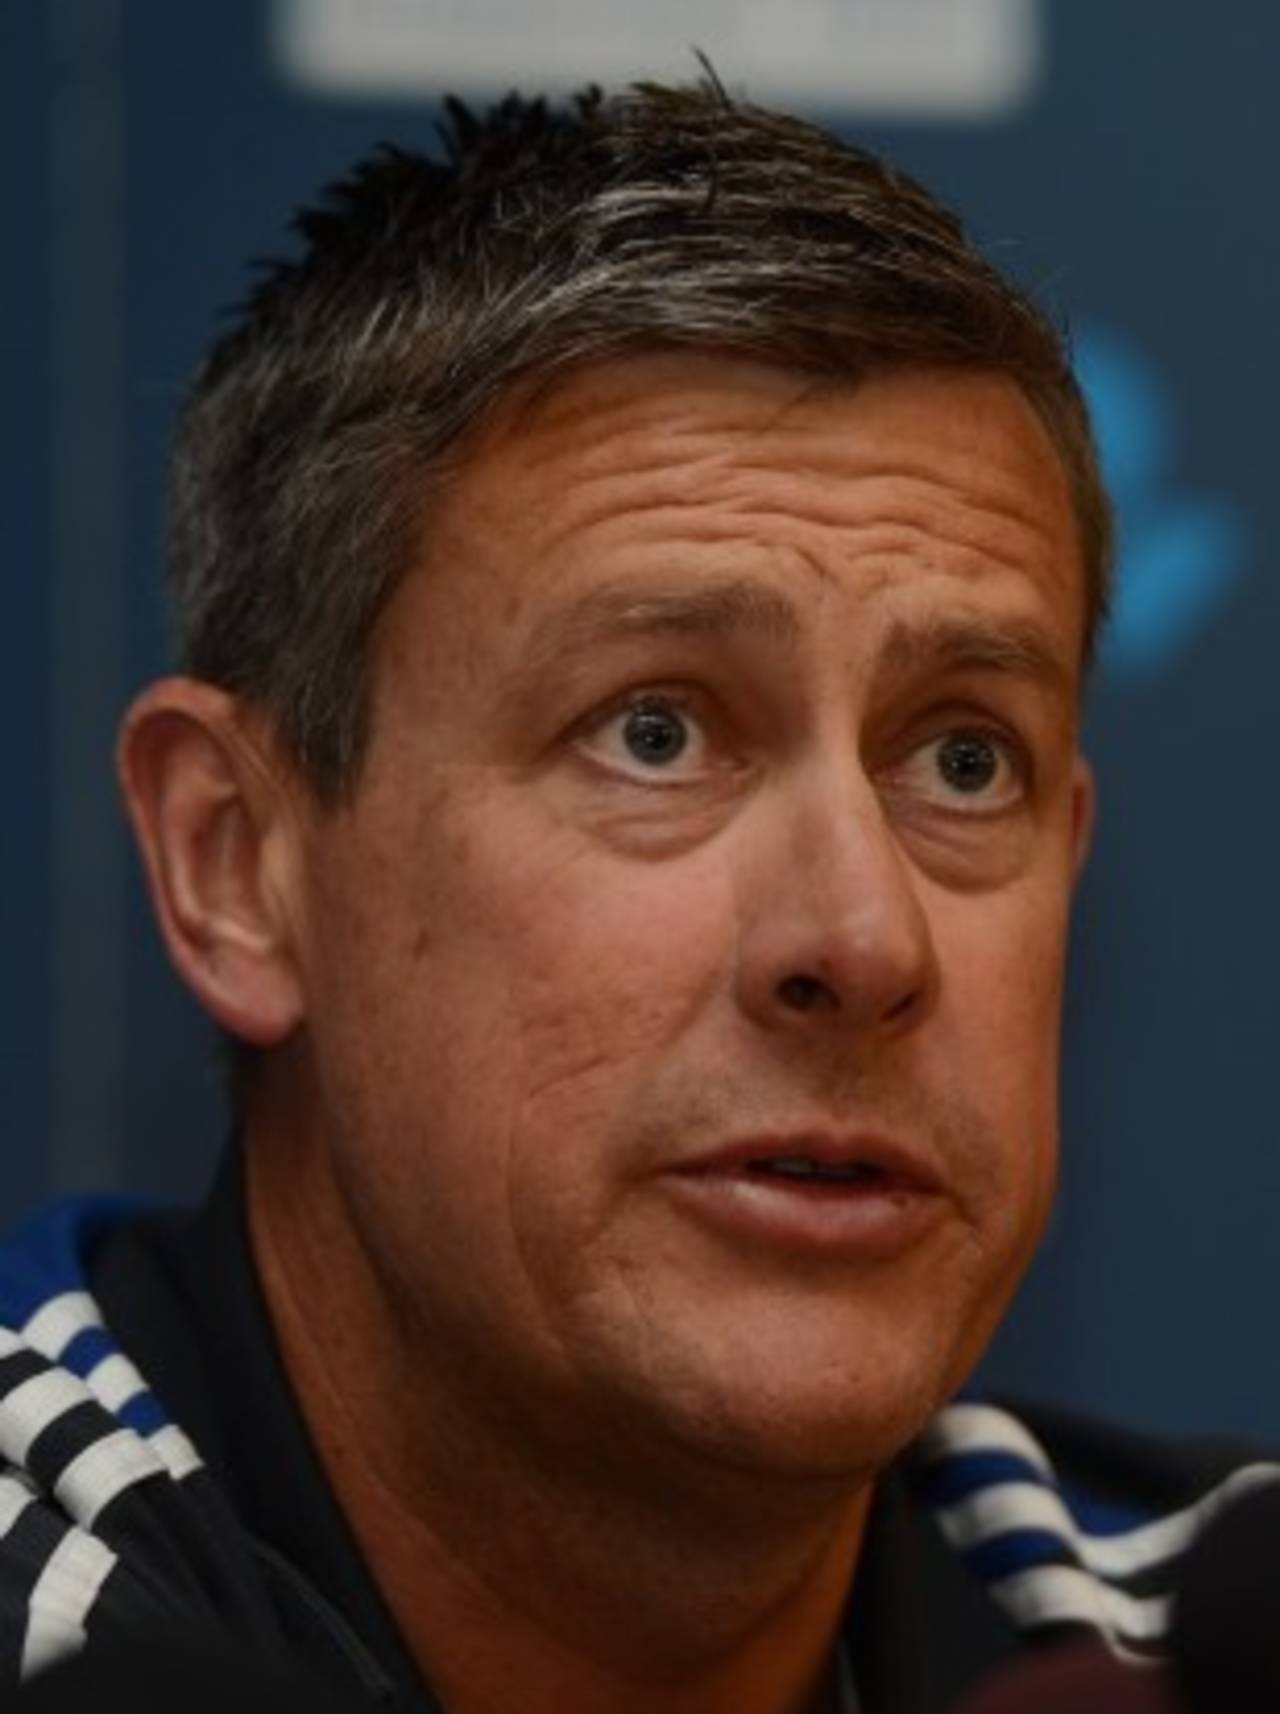 Ashley Giles, England's limited-overs coach, speaks to reporters, Auckland, January 30, 2013